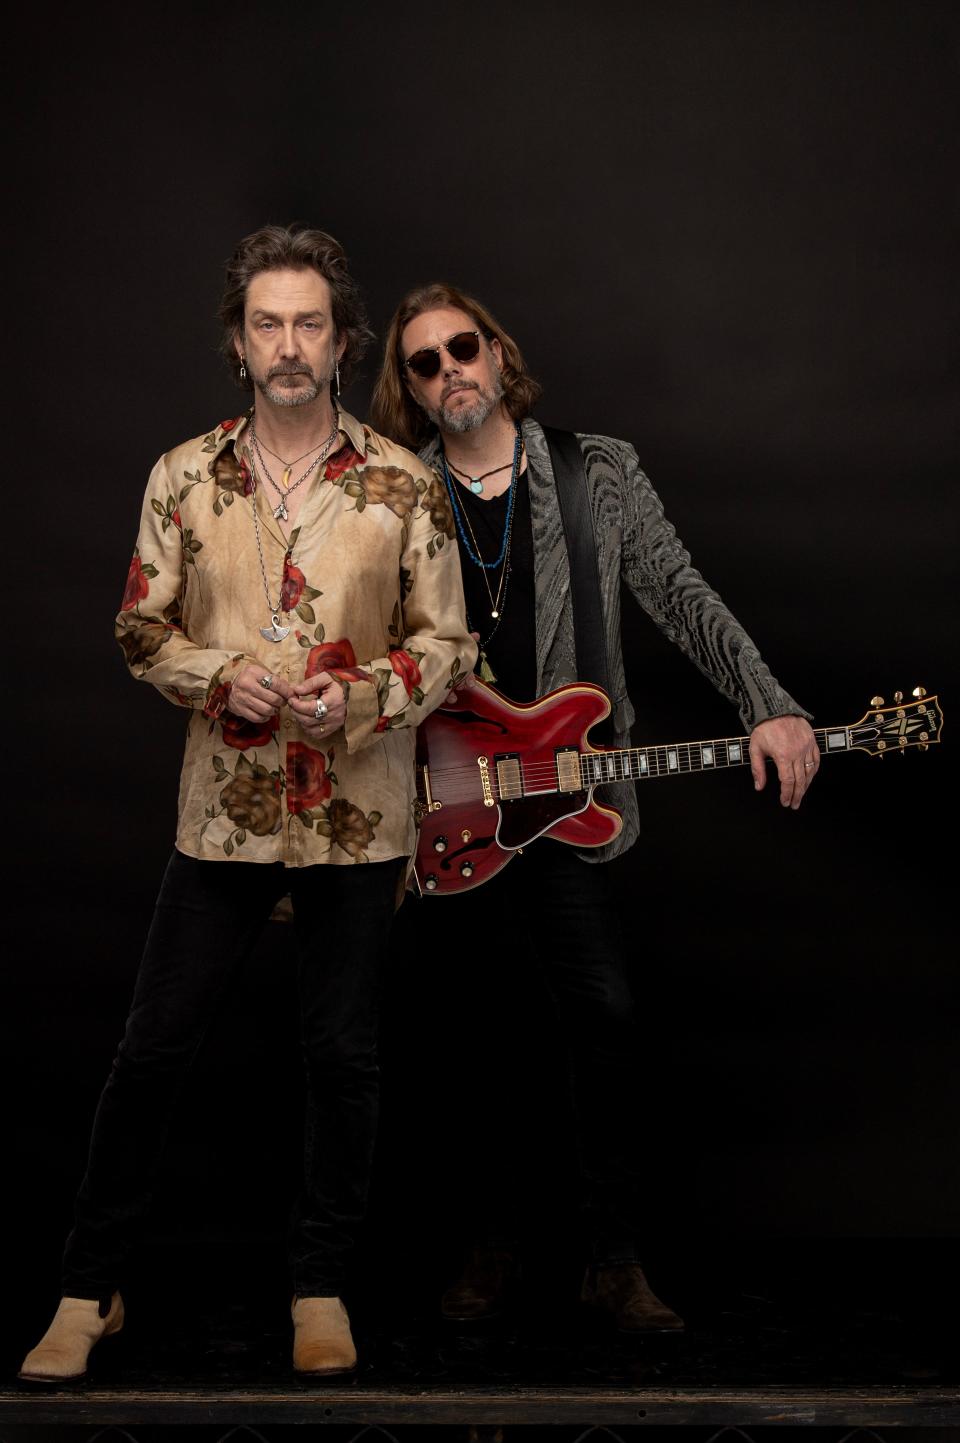 Brothers Chris and Rich Robinson reunited as the Black Crowes in 2019 to mark the 30th anniversary of their debut album, "Shake Your Money Maker."